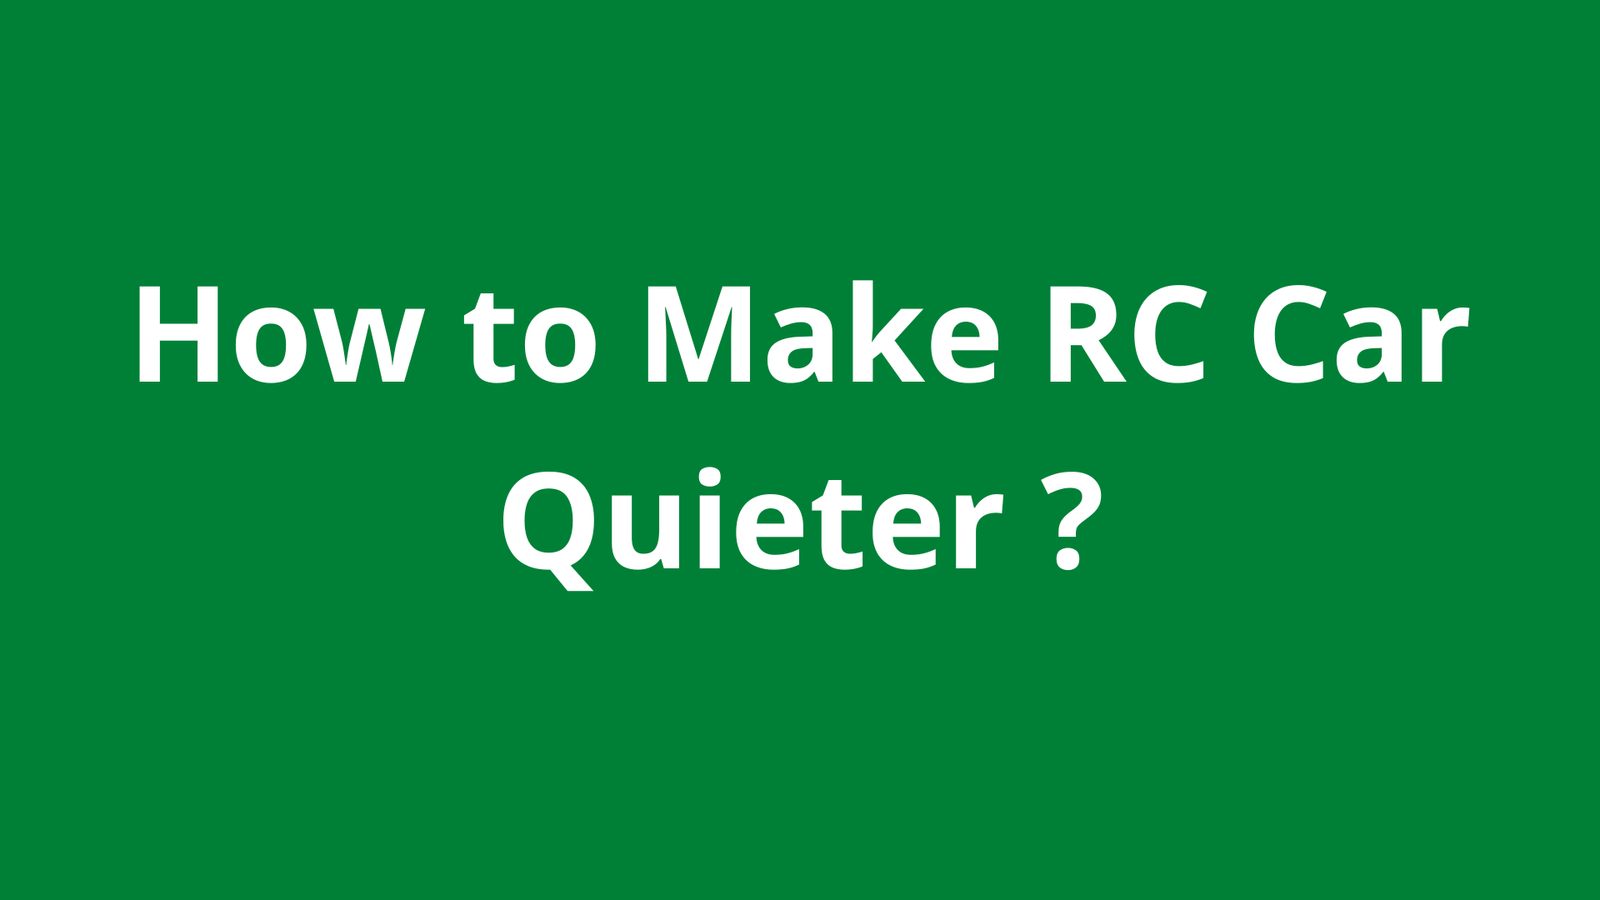 How to Make RC Car Quieter